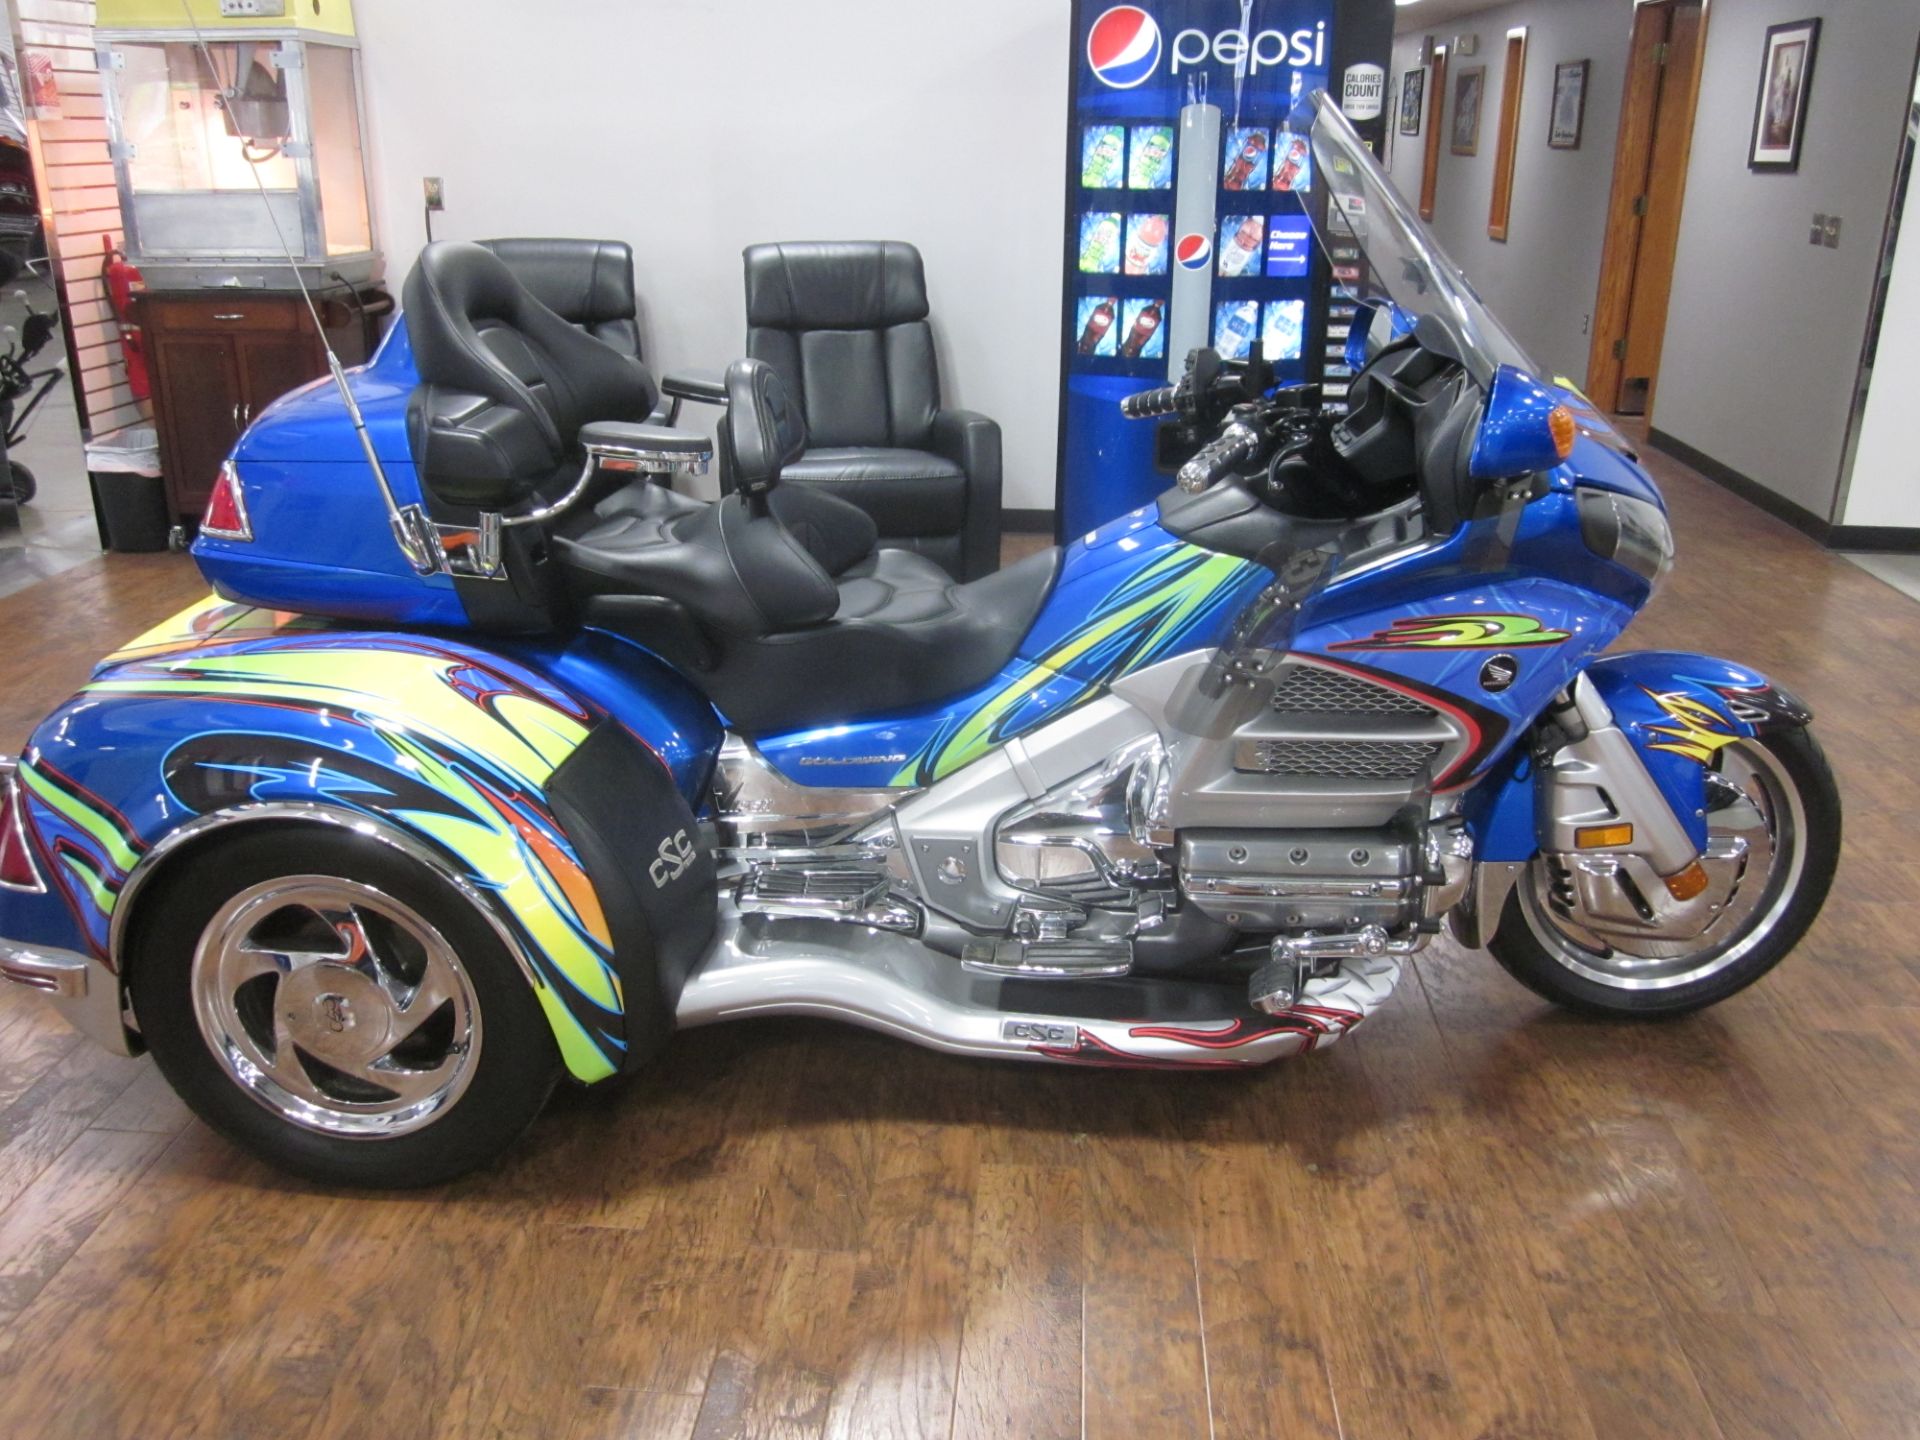 2012 CSC Gold Wing in Lima, Ohio - Photo 3